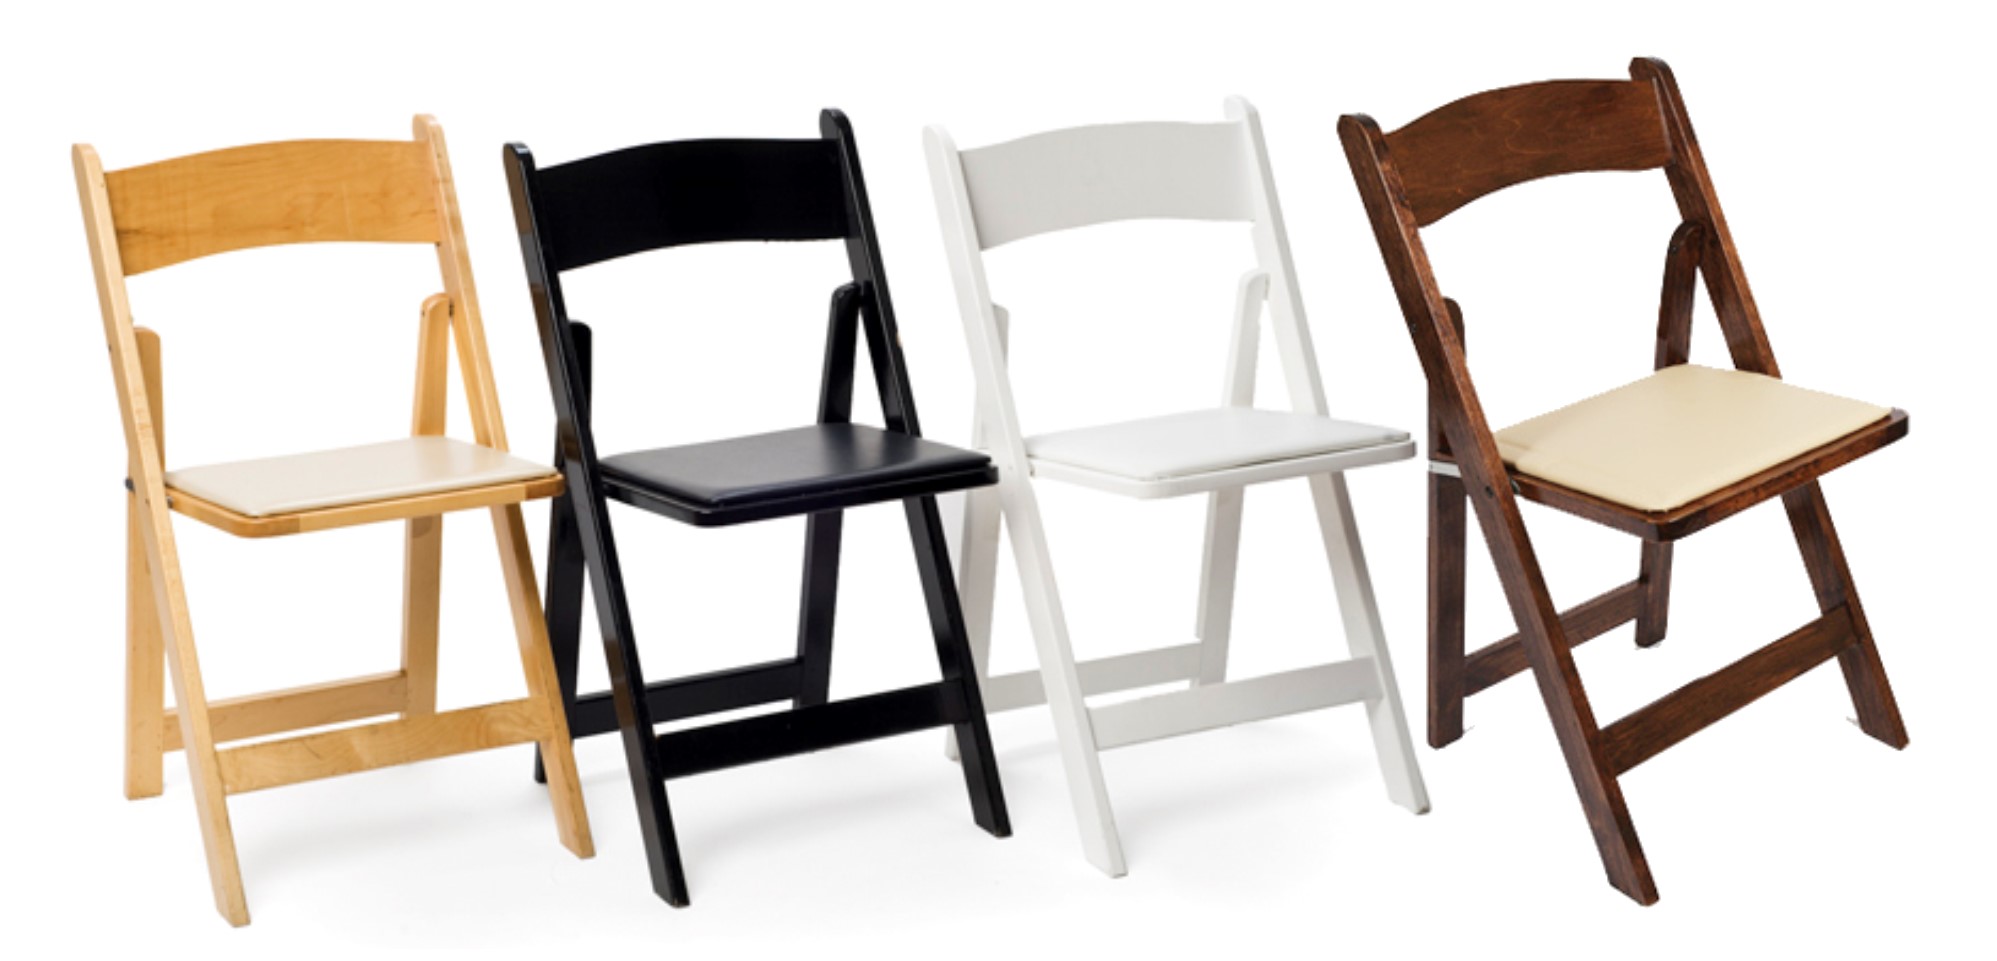 Chairs – Padded Folding Chairs